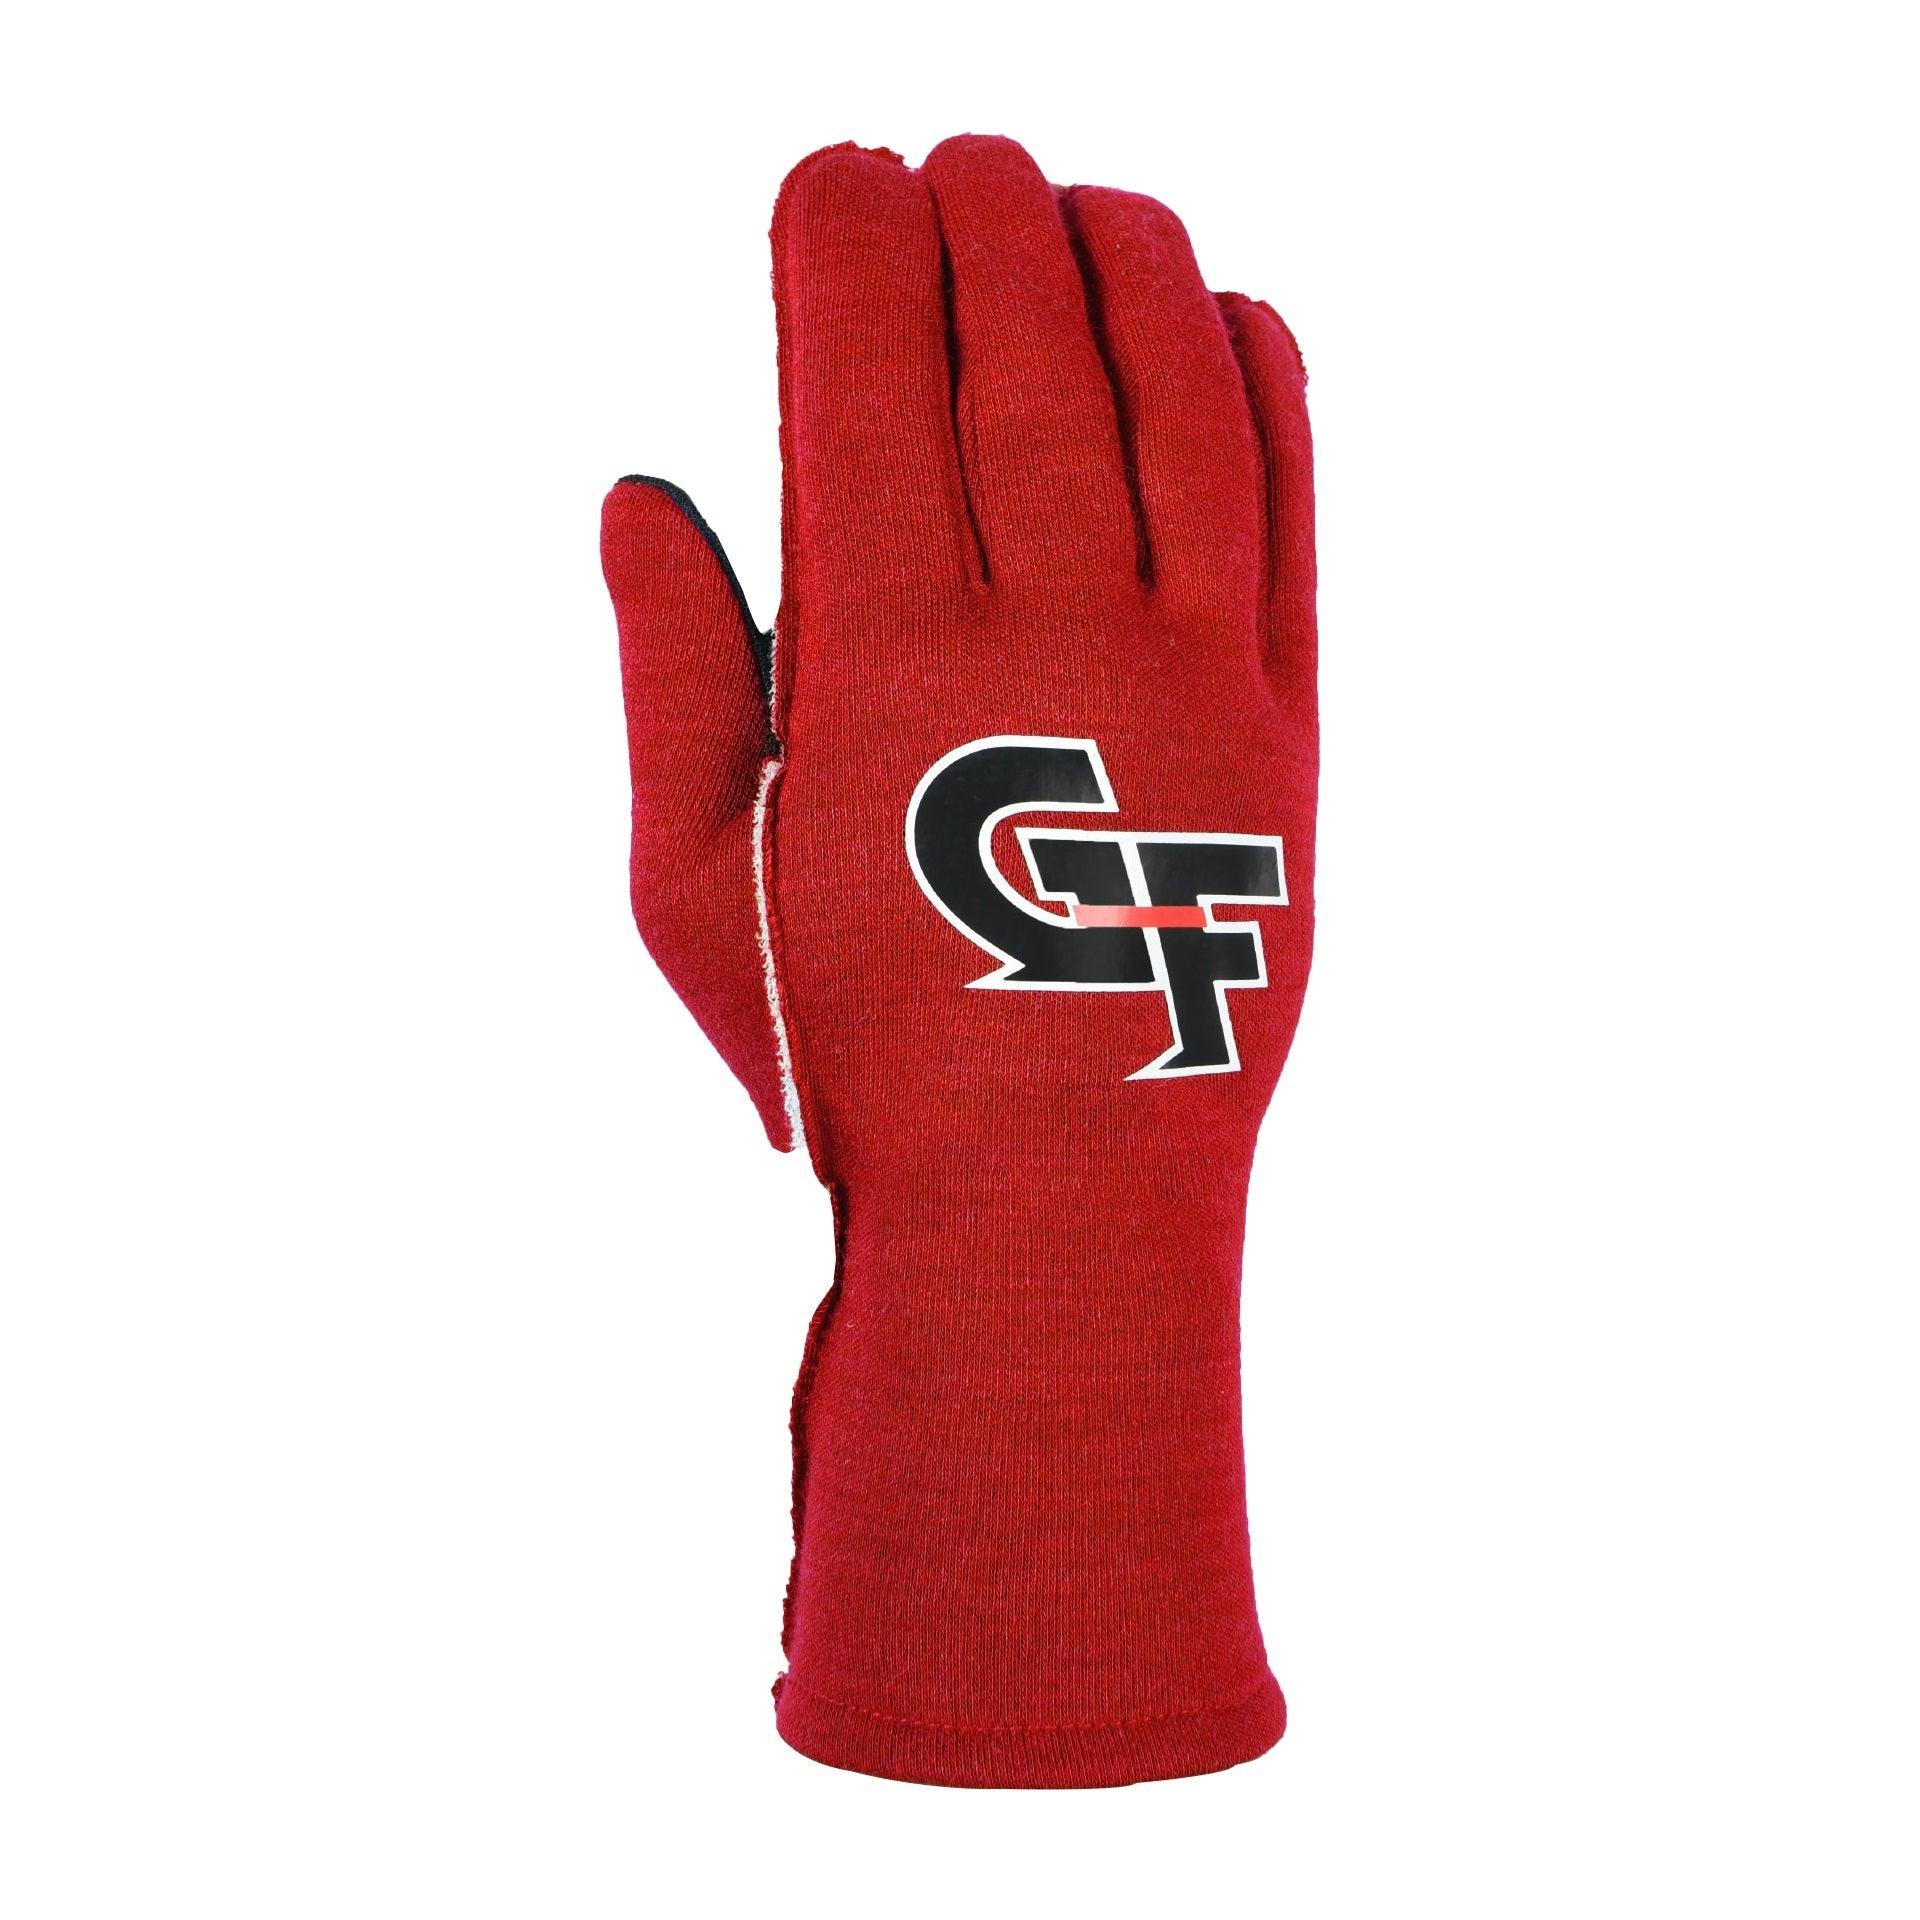 Gloves G-Limit XX-Large Red - Burlile Performance Products